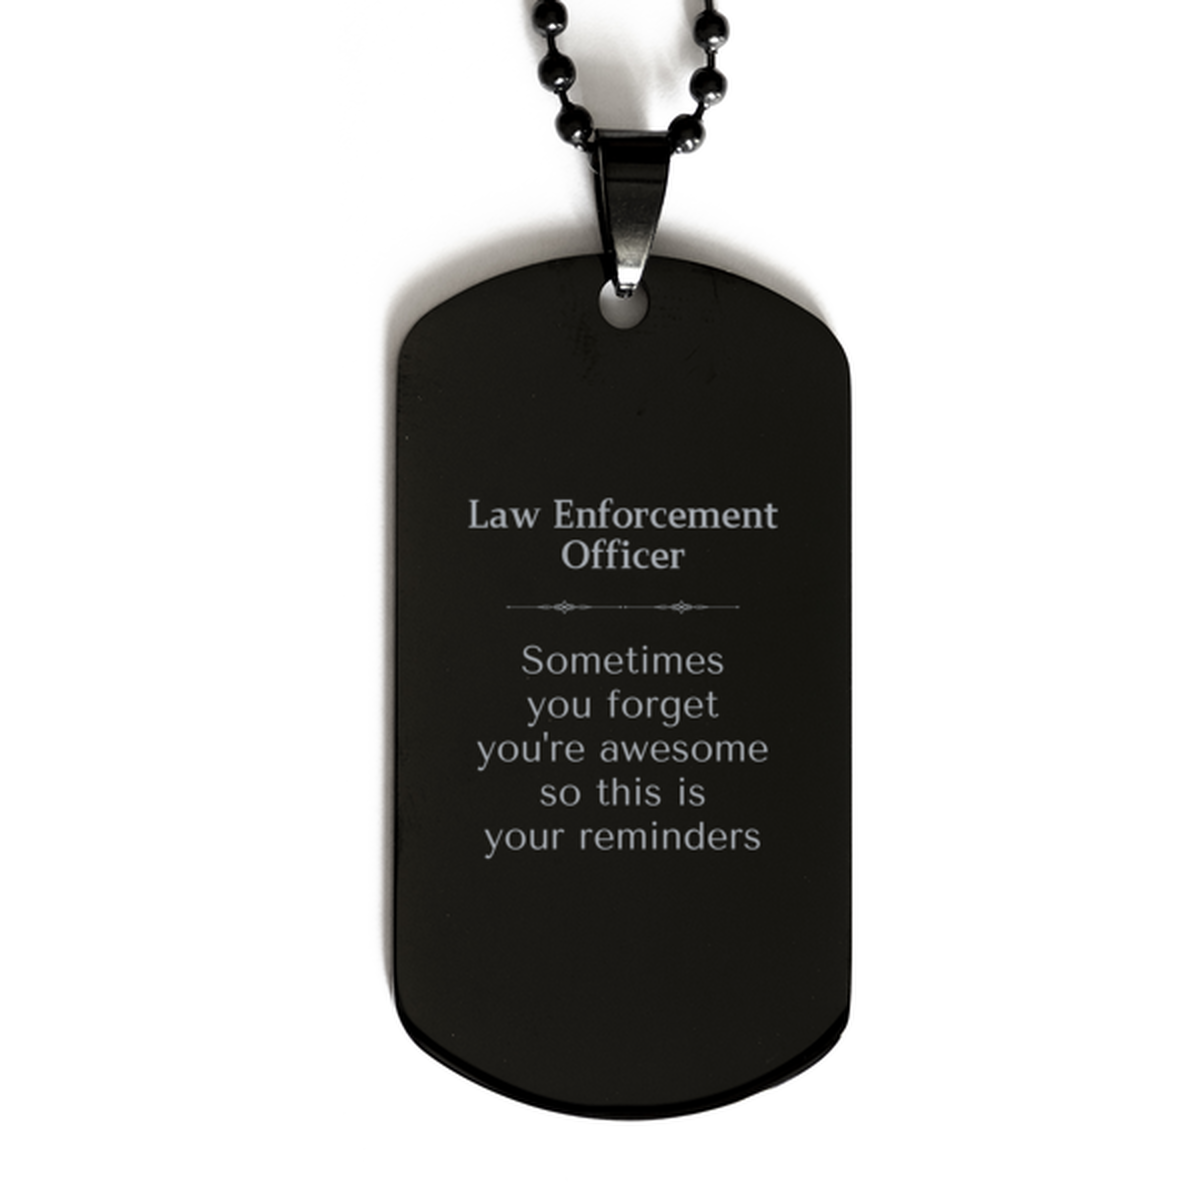 Sentimental Law Enforcement Officer Black Dog Tag, Law Enforcement Officer Sometimes you forget you're awesome so this is your reminders, Graduation Christmas Birthday Gifts for Law Enforcement Officer, Men, Women, Coworkers